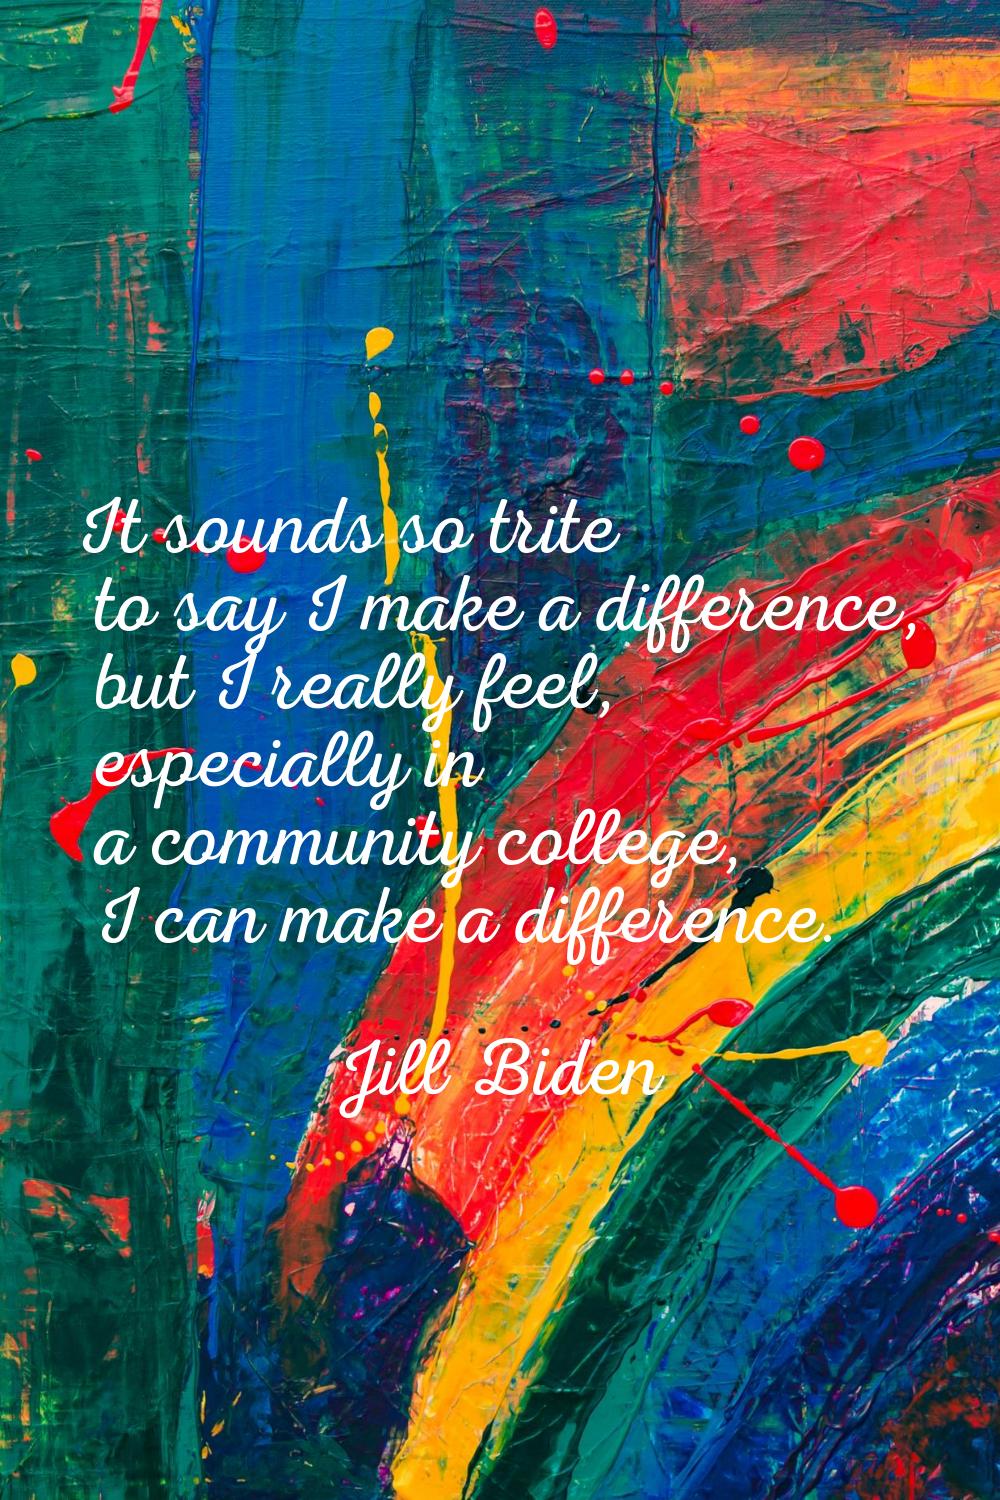 It sounds so trite to say I make a difference, but I really feel, especially in a community college